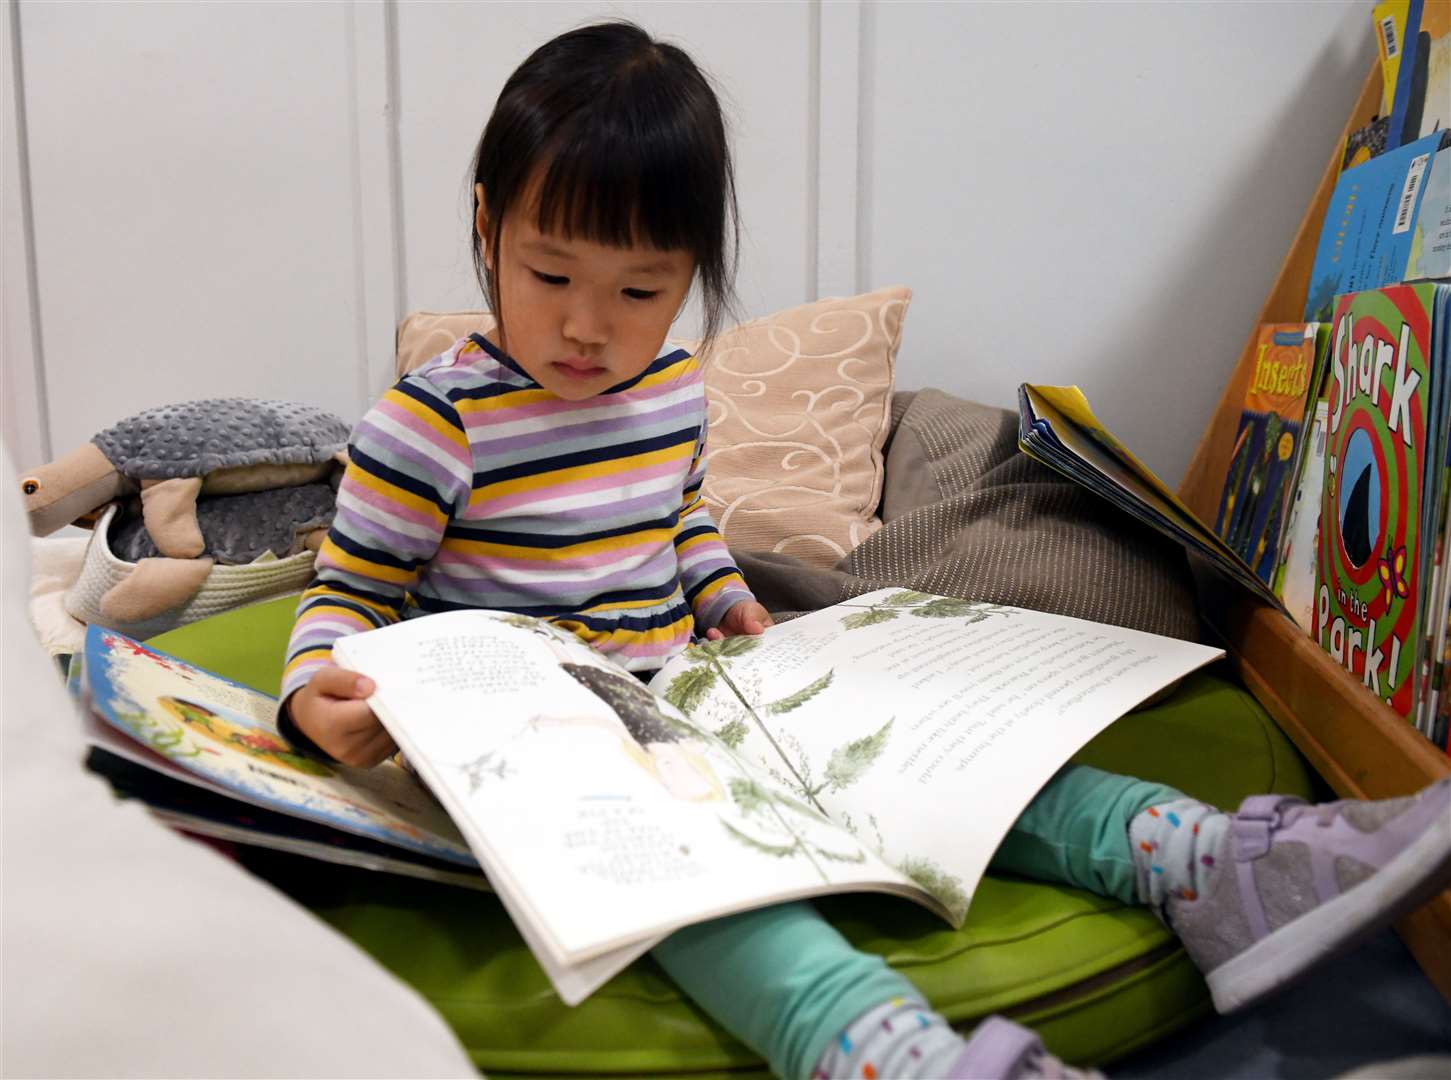 Grace Ghan has a quiet moment with a book.